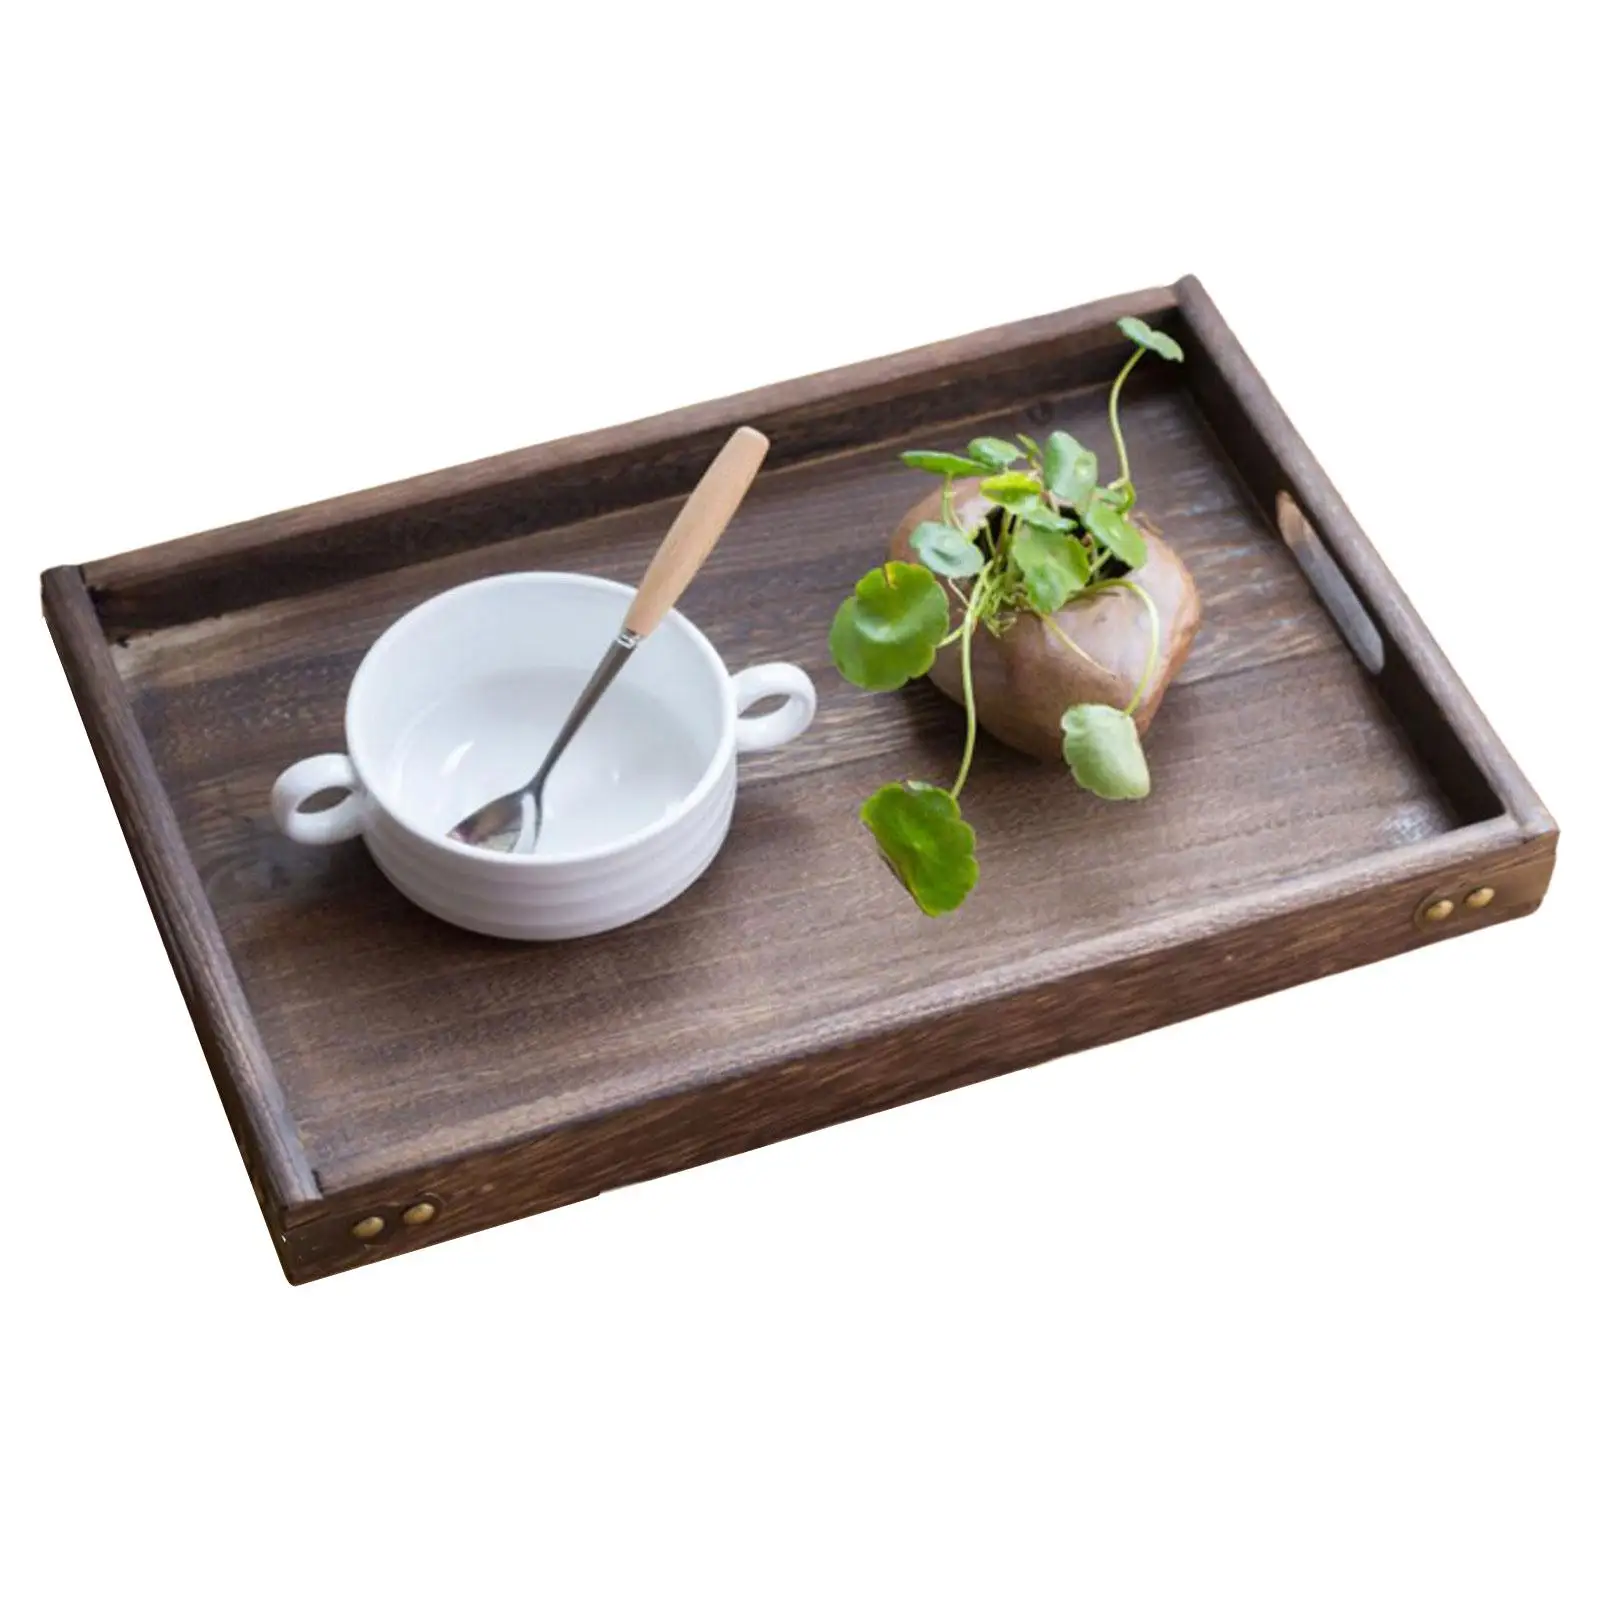 Wooden Serving Tray with Handle Eating Tray Easy to Clean Convenient for Countertop Centerpiece Decorative Rustic Rectangular